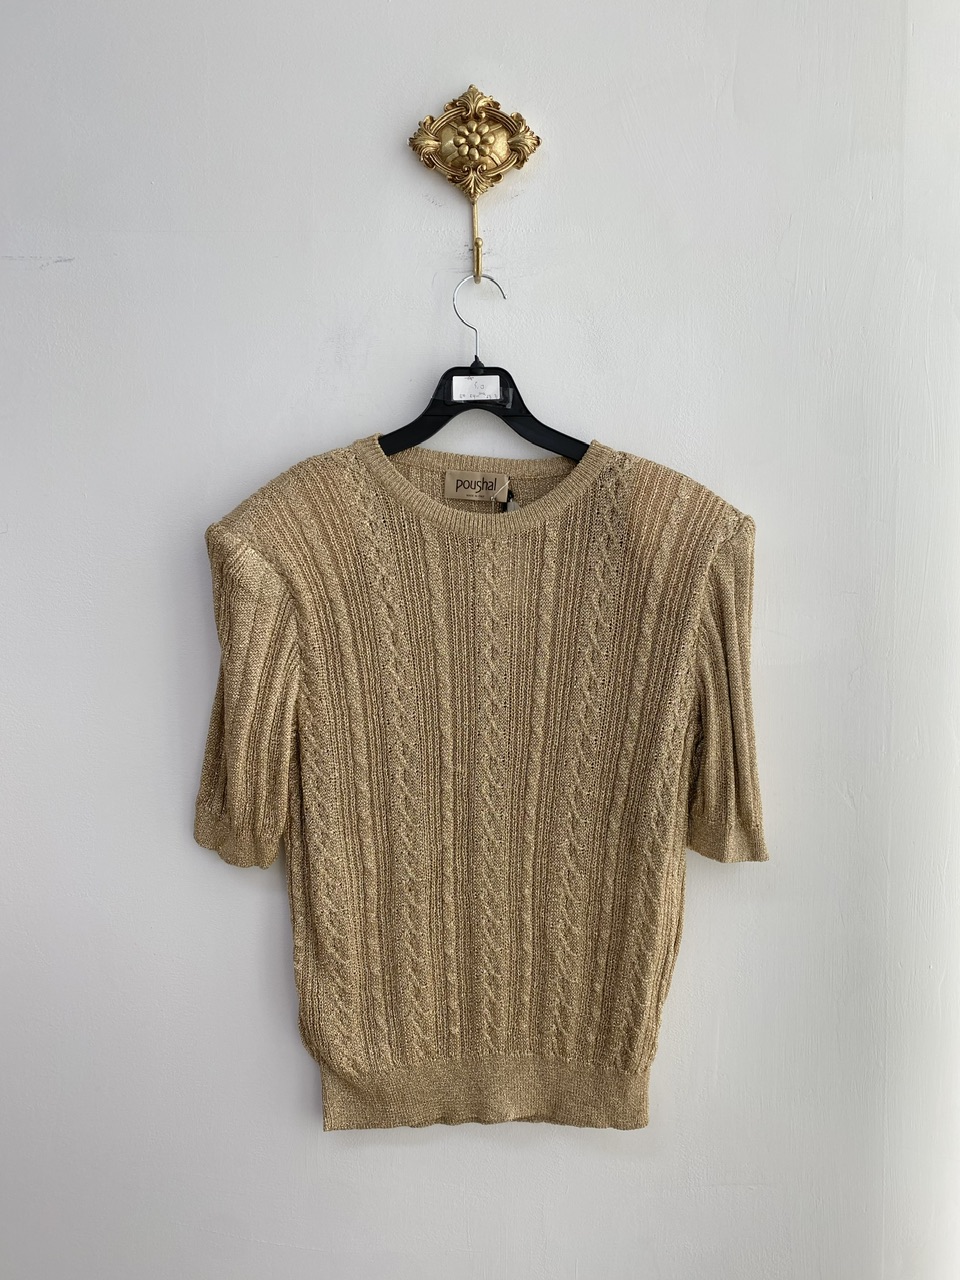 Gold glittery half sleeve knit t-shirt (made in italy)